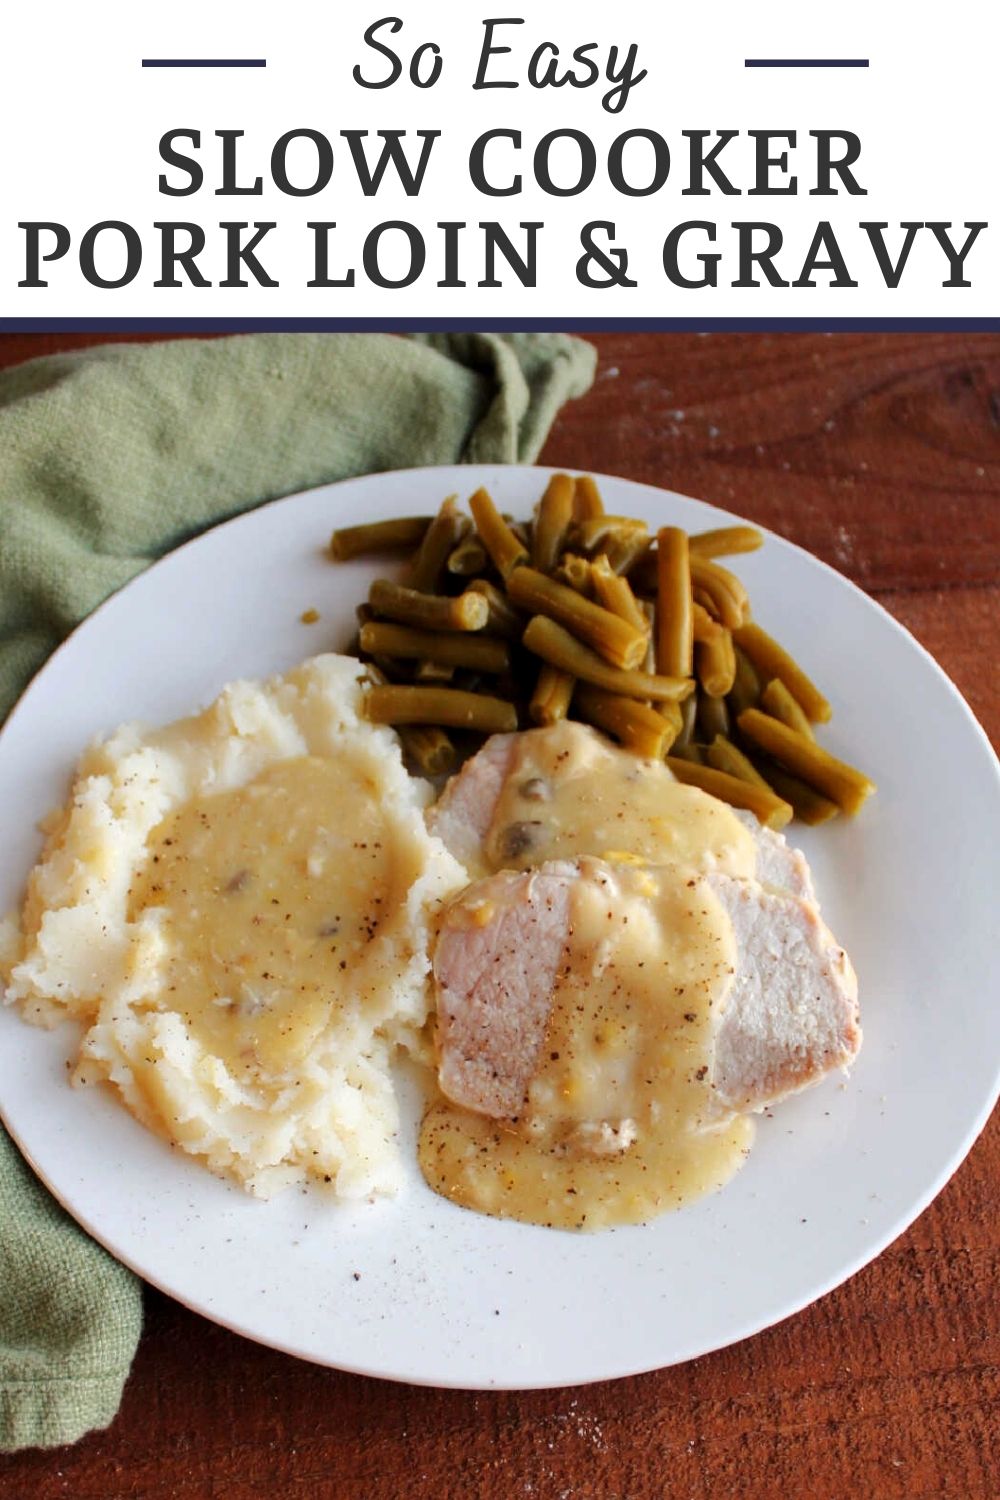 Slow cooker pork loin with creamy gravy is such an easy and comforting dinner option. It cooks while you are busy living your life and is tender and tasty when you are ready to eat.